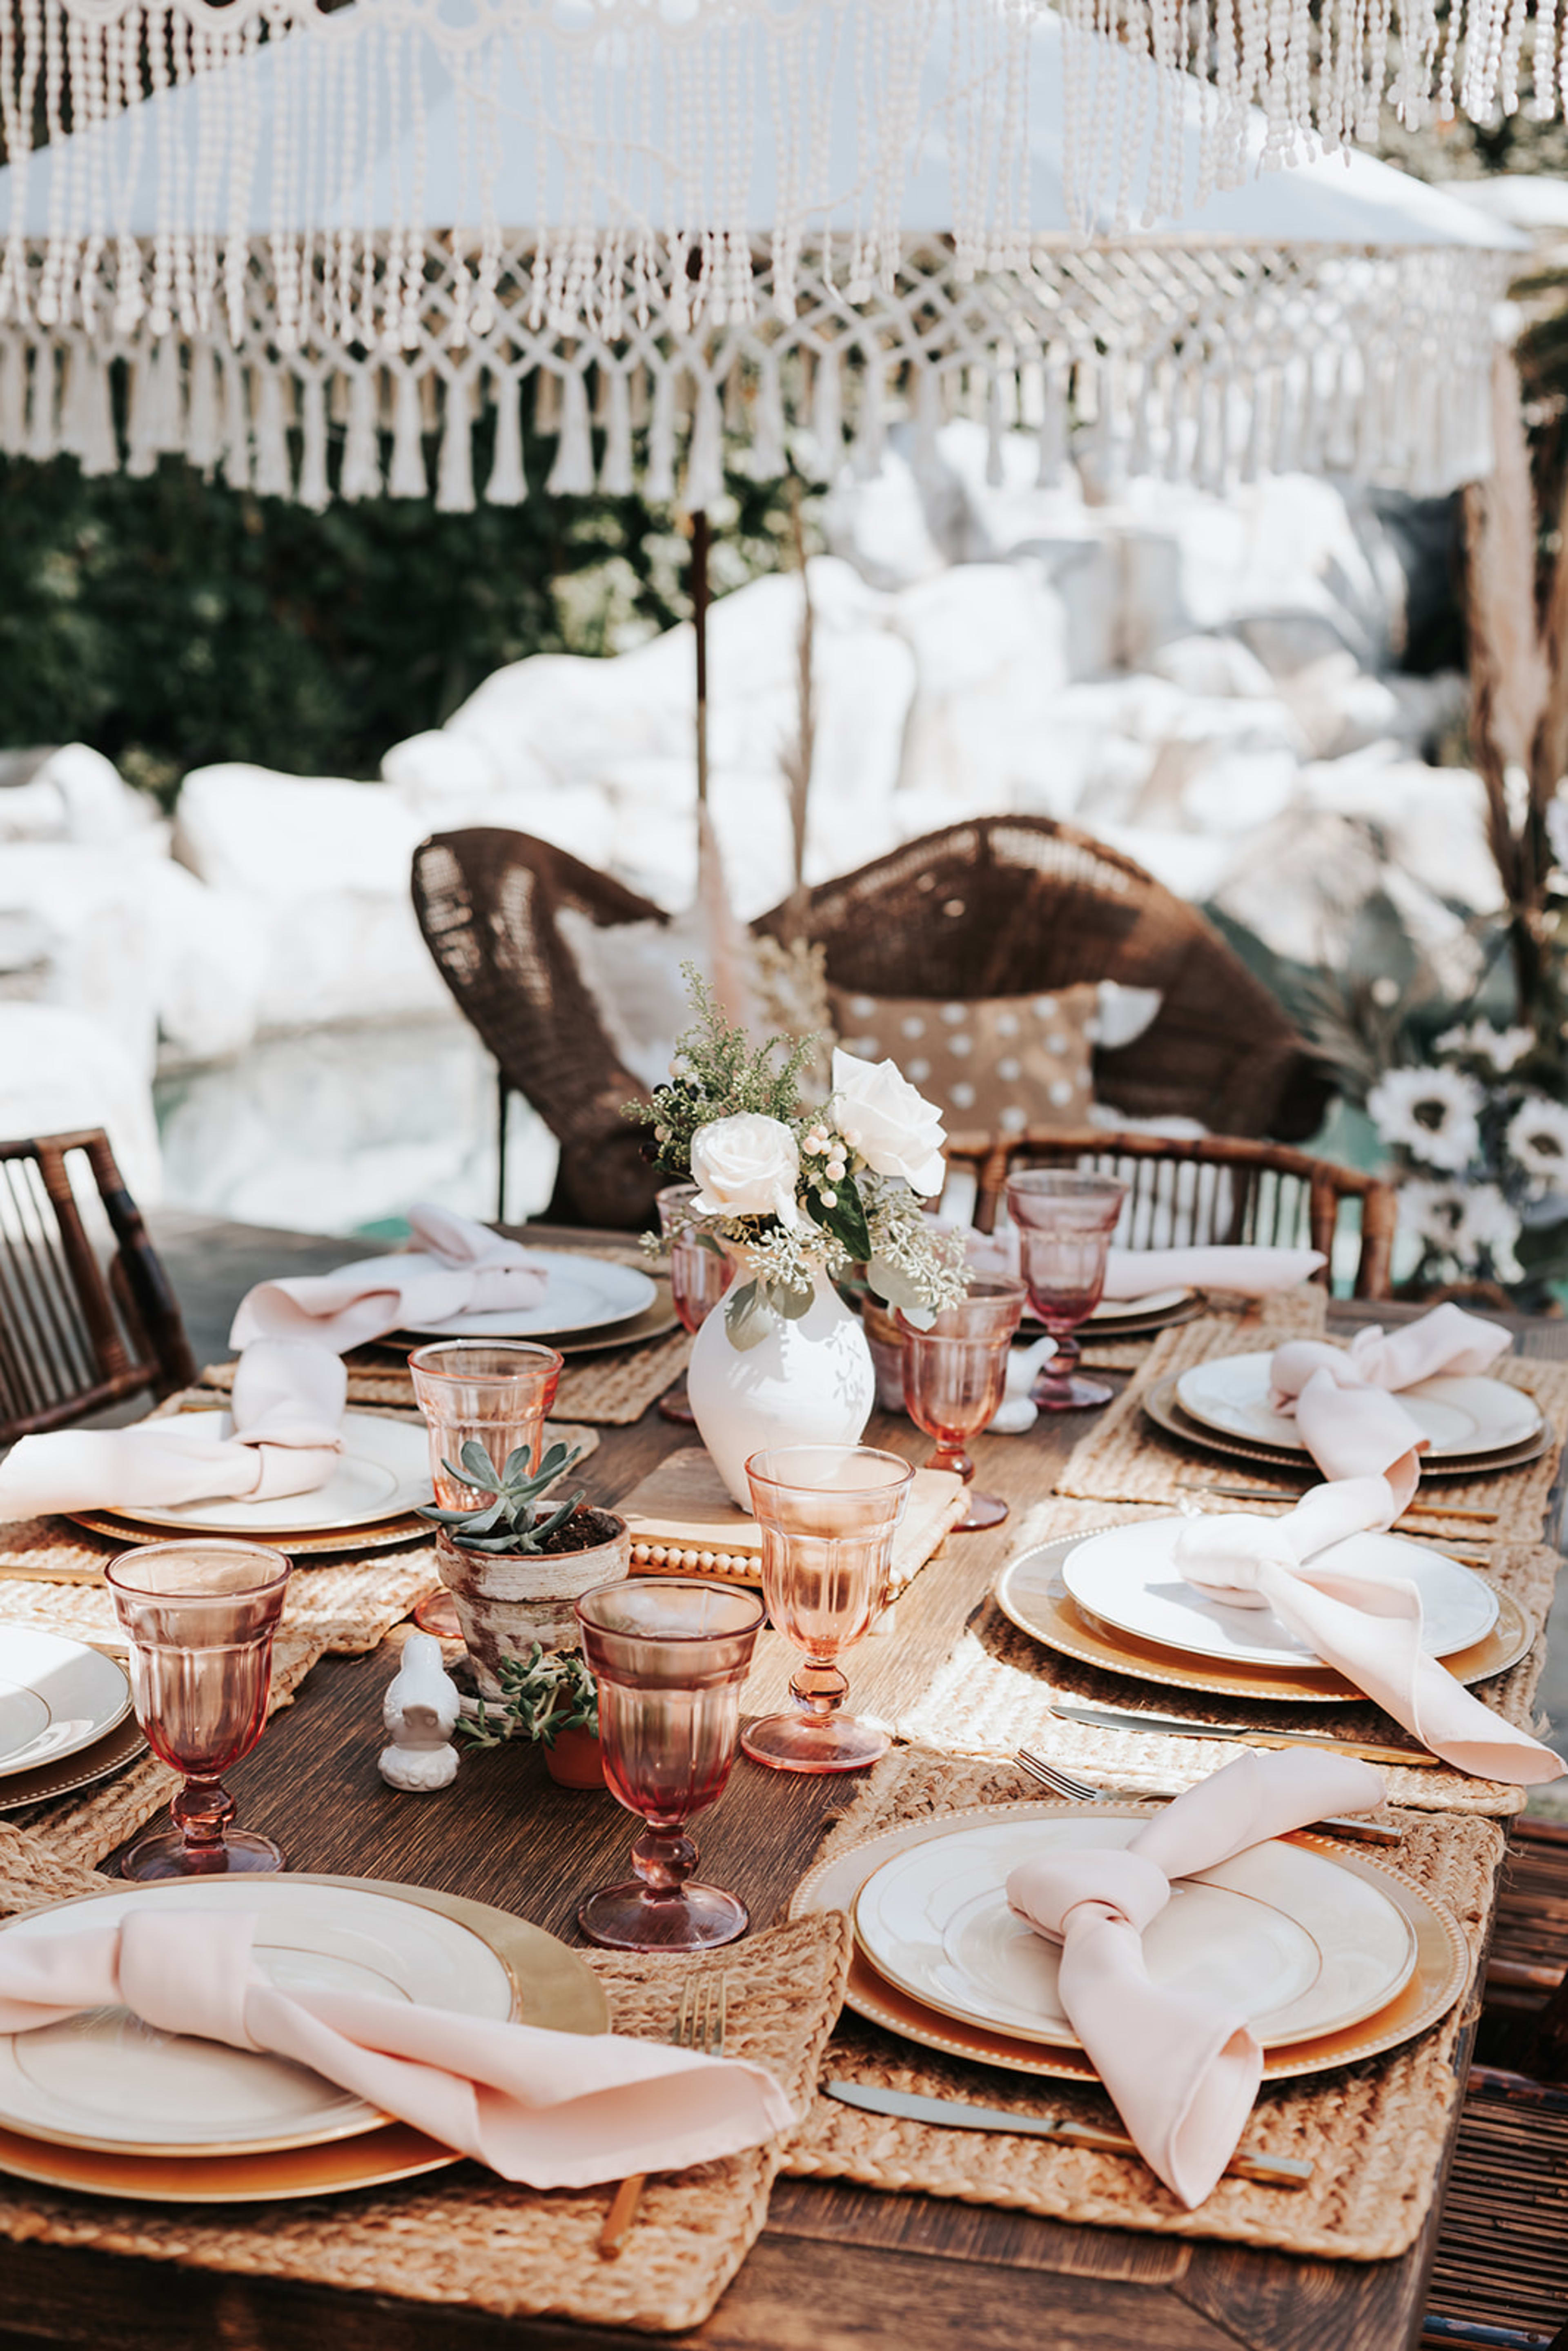 A boho outdoor table set with white plates and glasses.